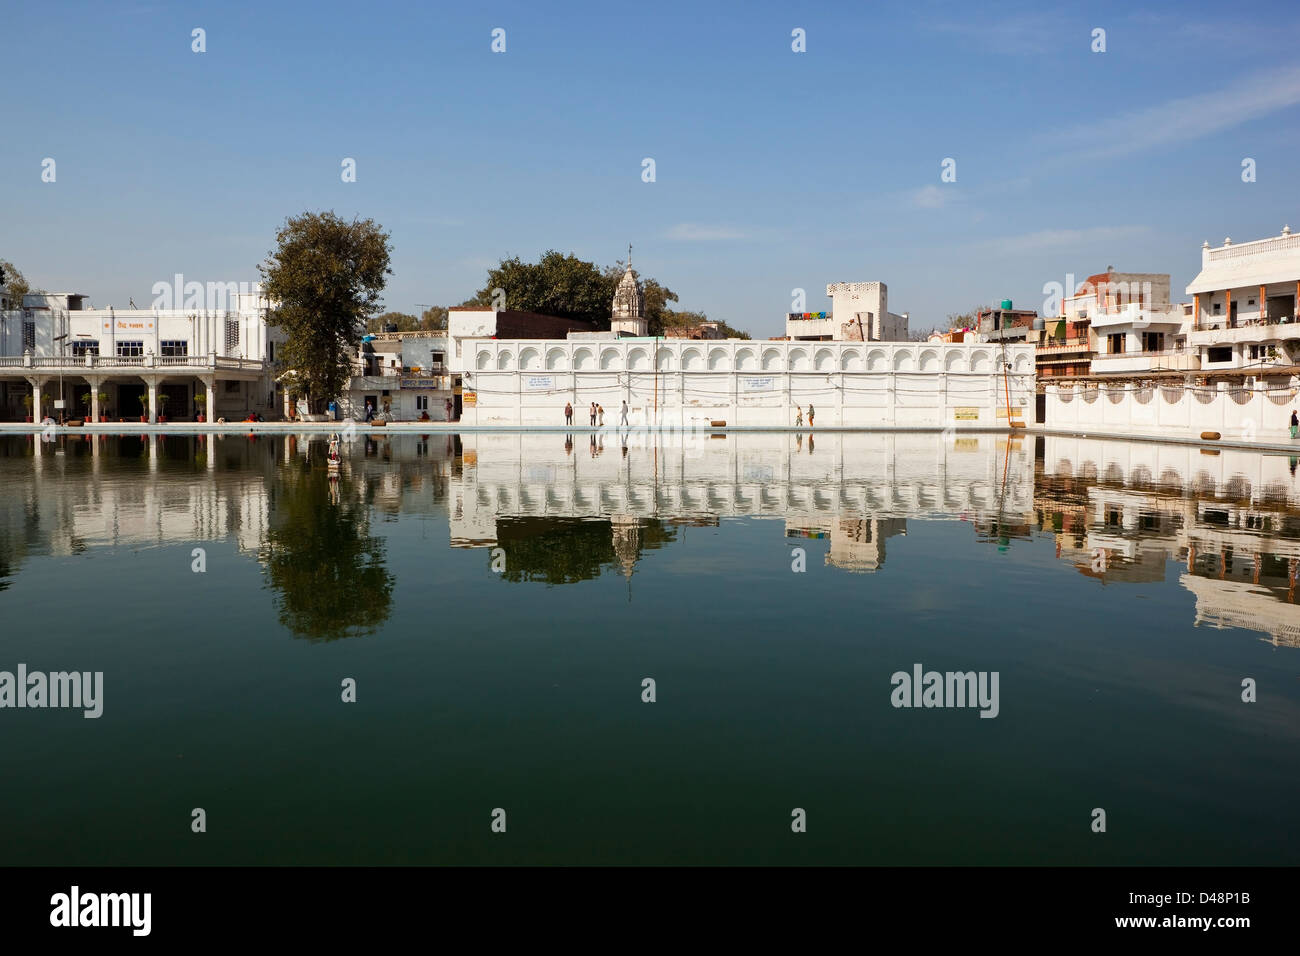 A view across the tranquil lake surrounding Shree Durgiana Hindu temple in Amritsar, Punjab, India. Stock Photo